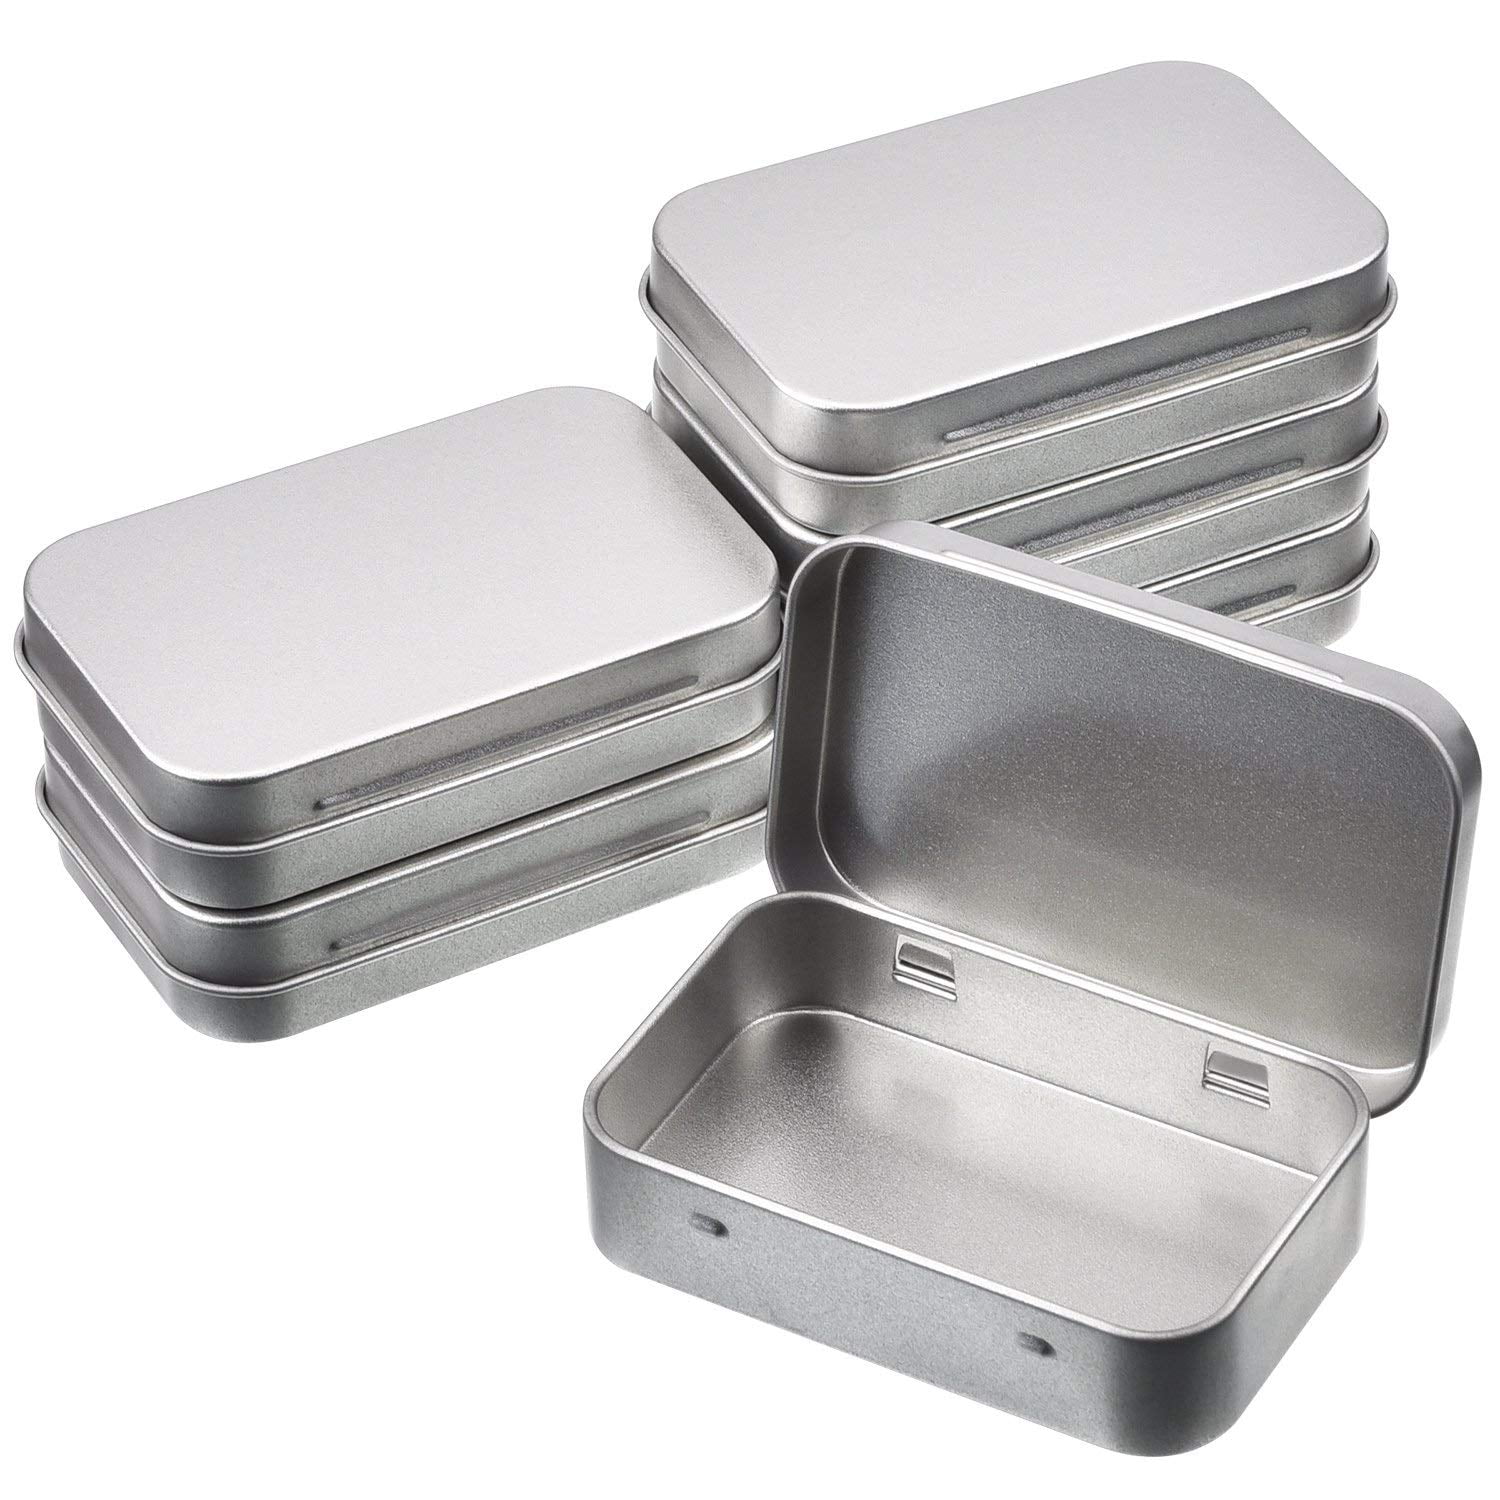 Home Organizer 24 Pack Metal Rectangular Empty Hinged Tins Box Containers Mini Portable Box Small Storage Kit 3.75 by 2.45 by 0.8 Inch Silver 